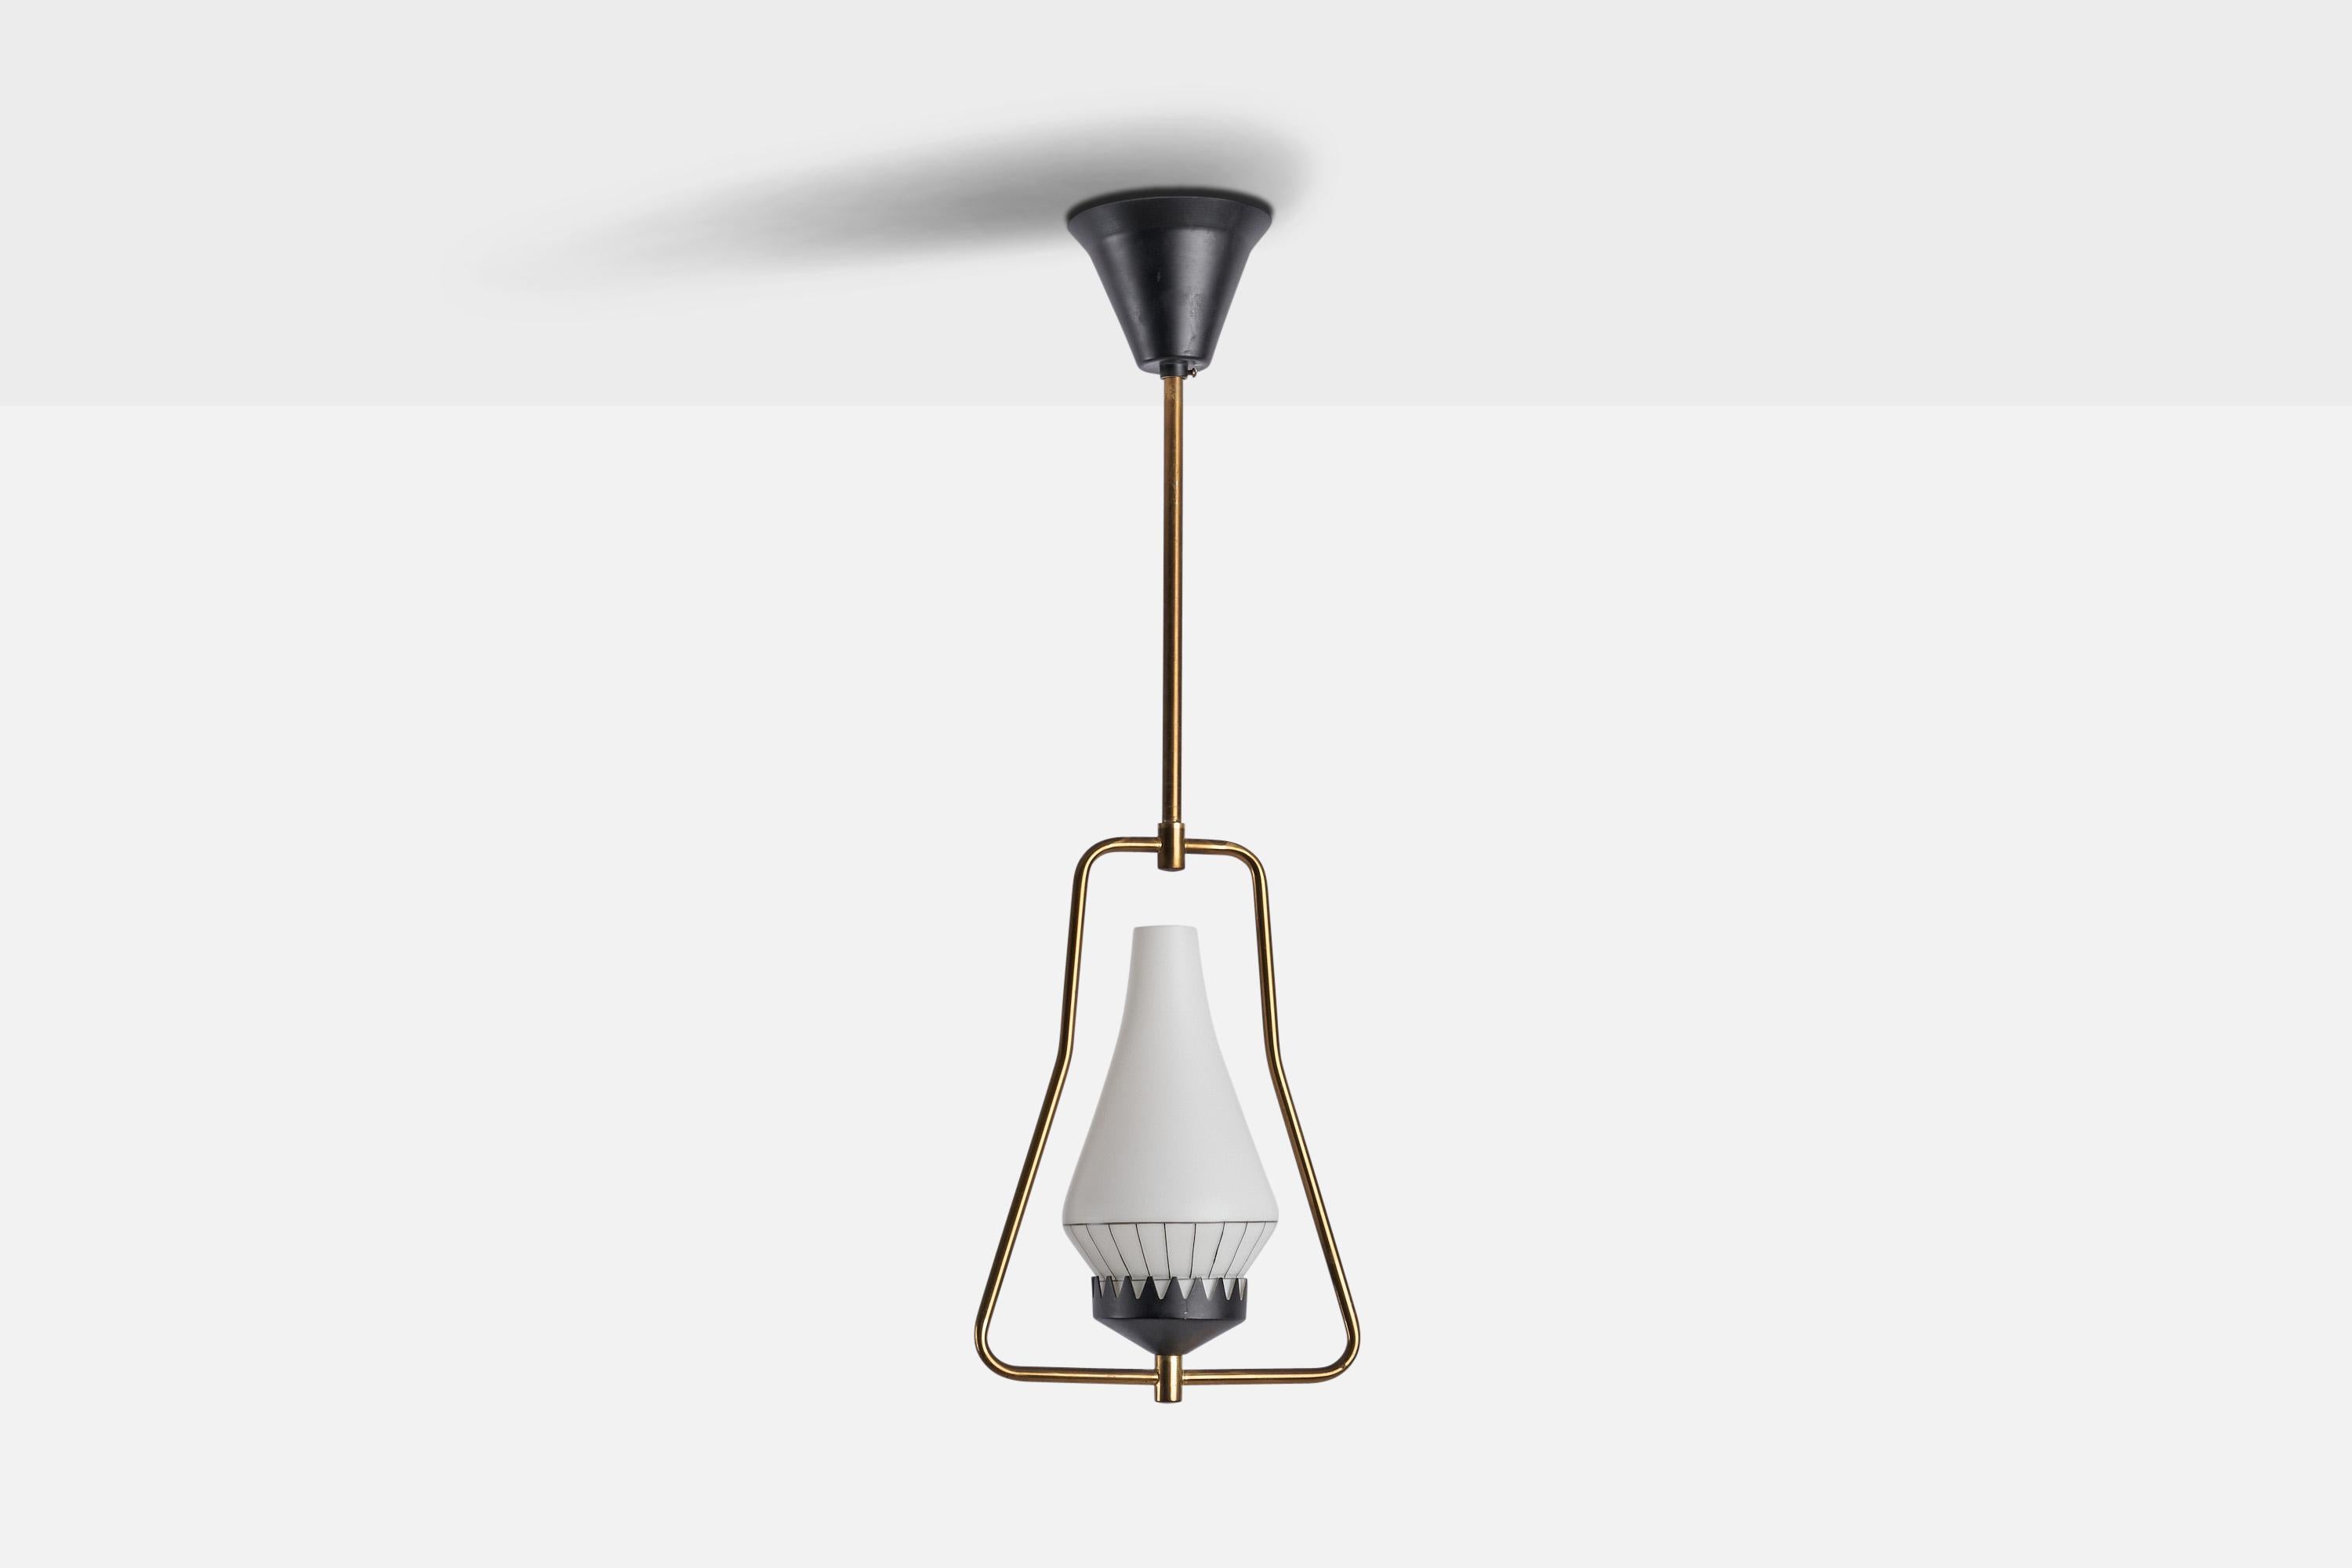 
A brass, black-lacquered metal and etched glass pendant light designed and produced in Sweden, c. 1950s.
Dimensions of canopy (inches) : 3.15” H x 4” Diameter
Socket takes standard E-26 bulb. There is no maximum wattage stated on the fixture. All